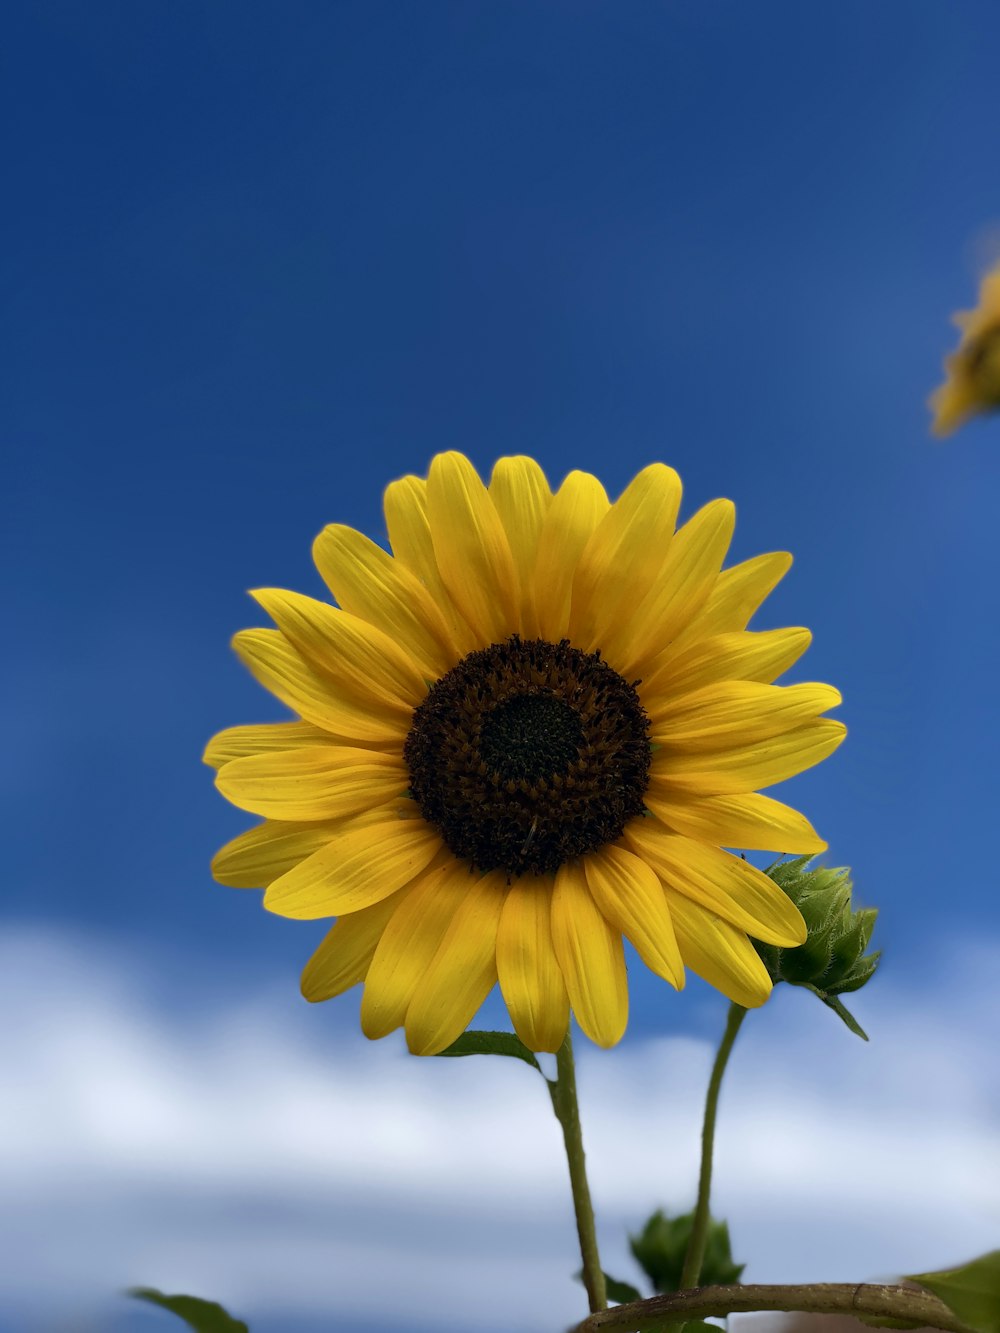 Yellow sunflower in close up photography photo – Free Plant Image on  Unsplash